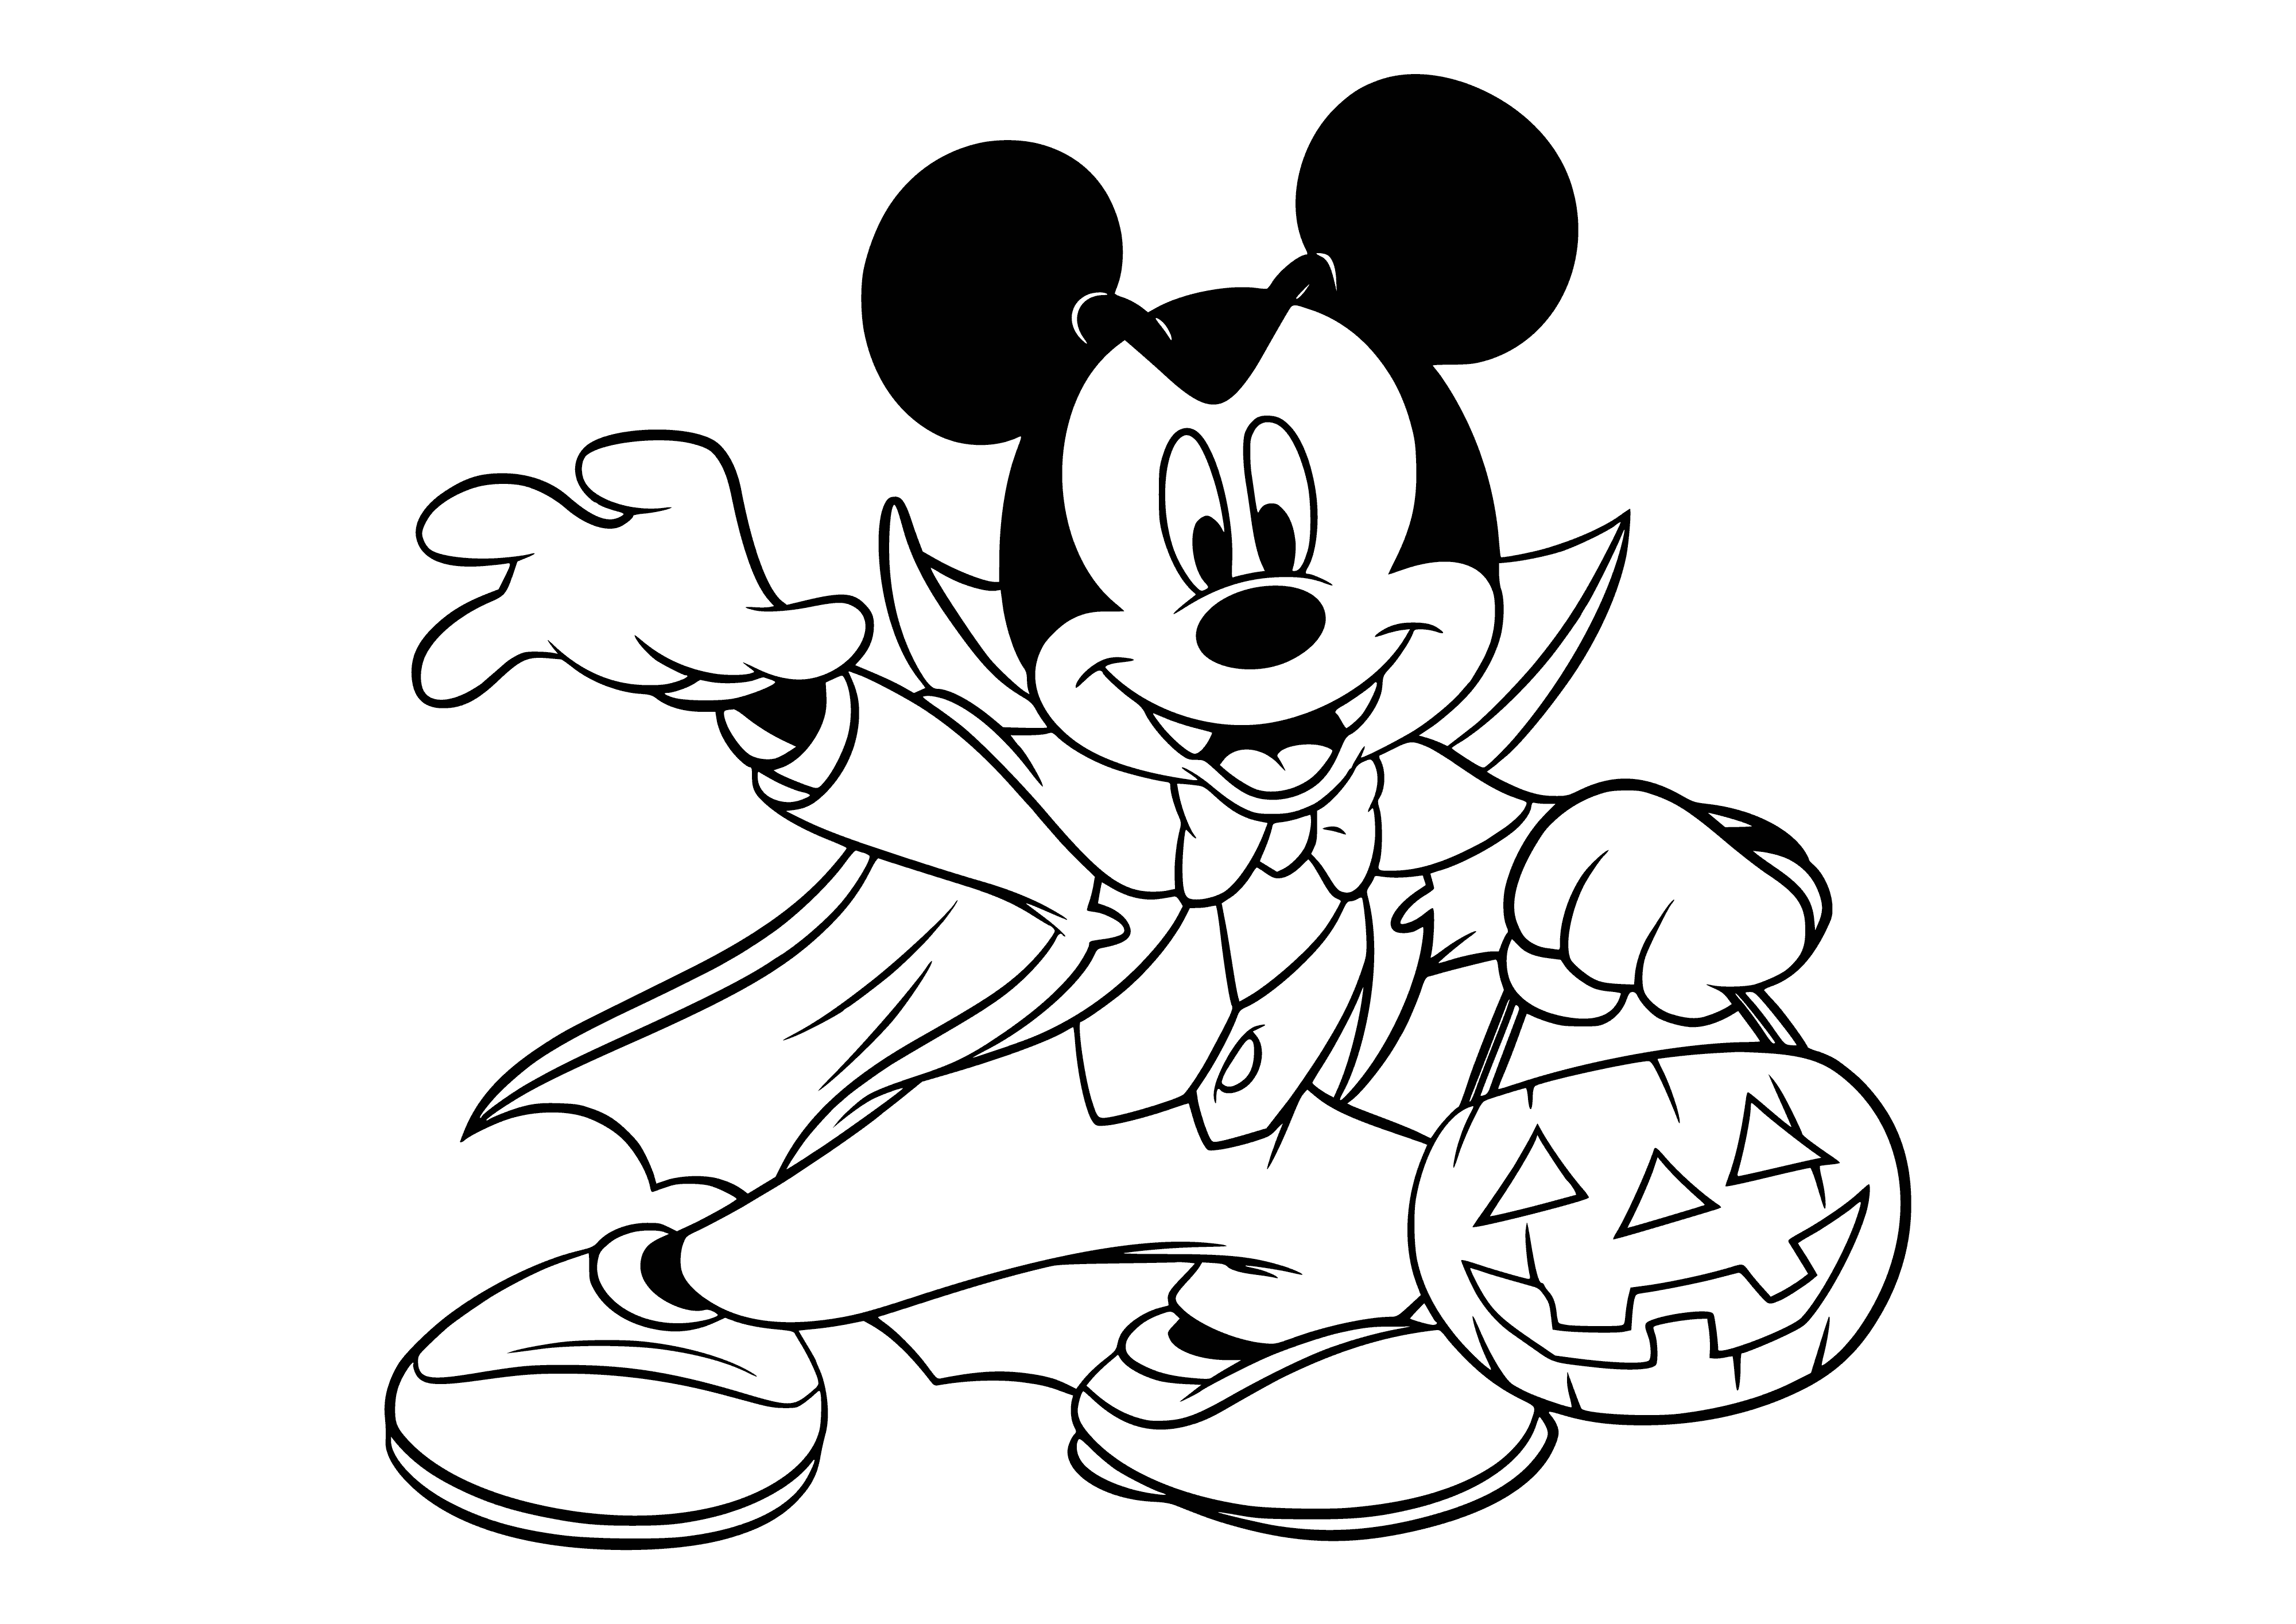 coloring page: Mickey Mouse wearing devil costume & holding wine in one hand & glass in other. Jack-o-lantern in background. Happy Halloween! #Halloween